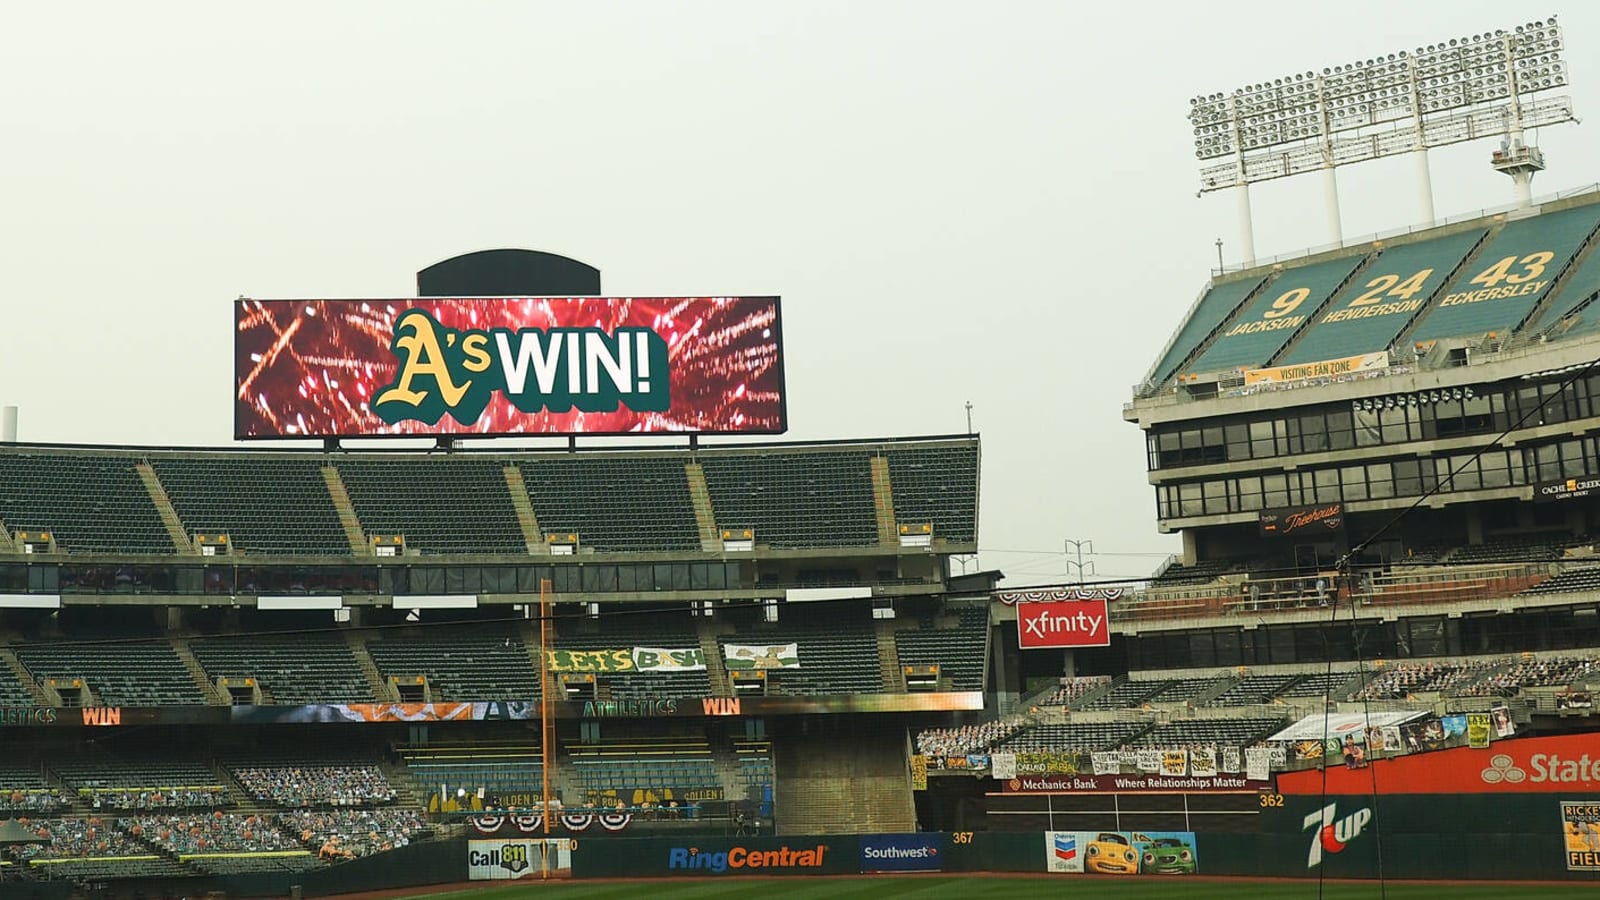 Las Vegas sees itself as better long-term opportunity for the Oakland A's